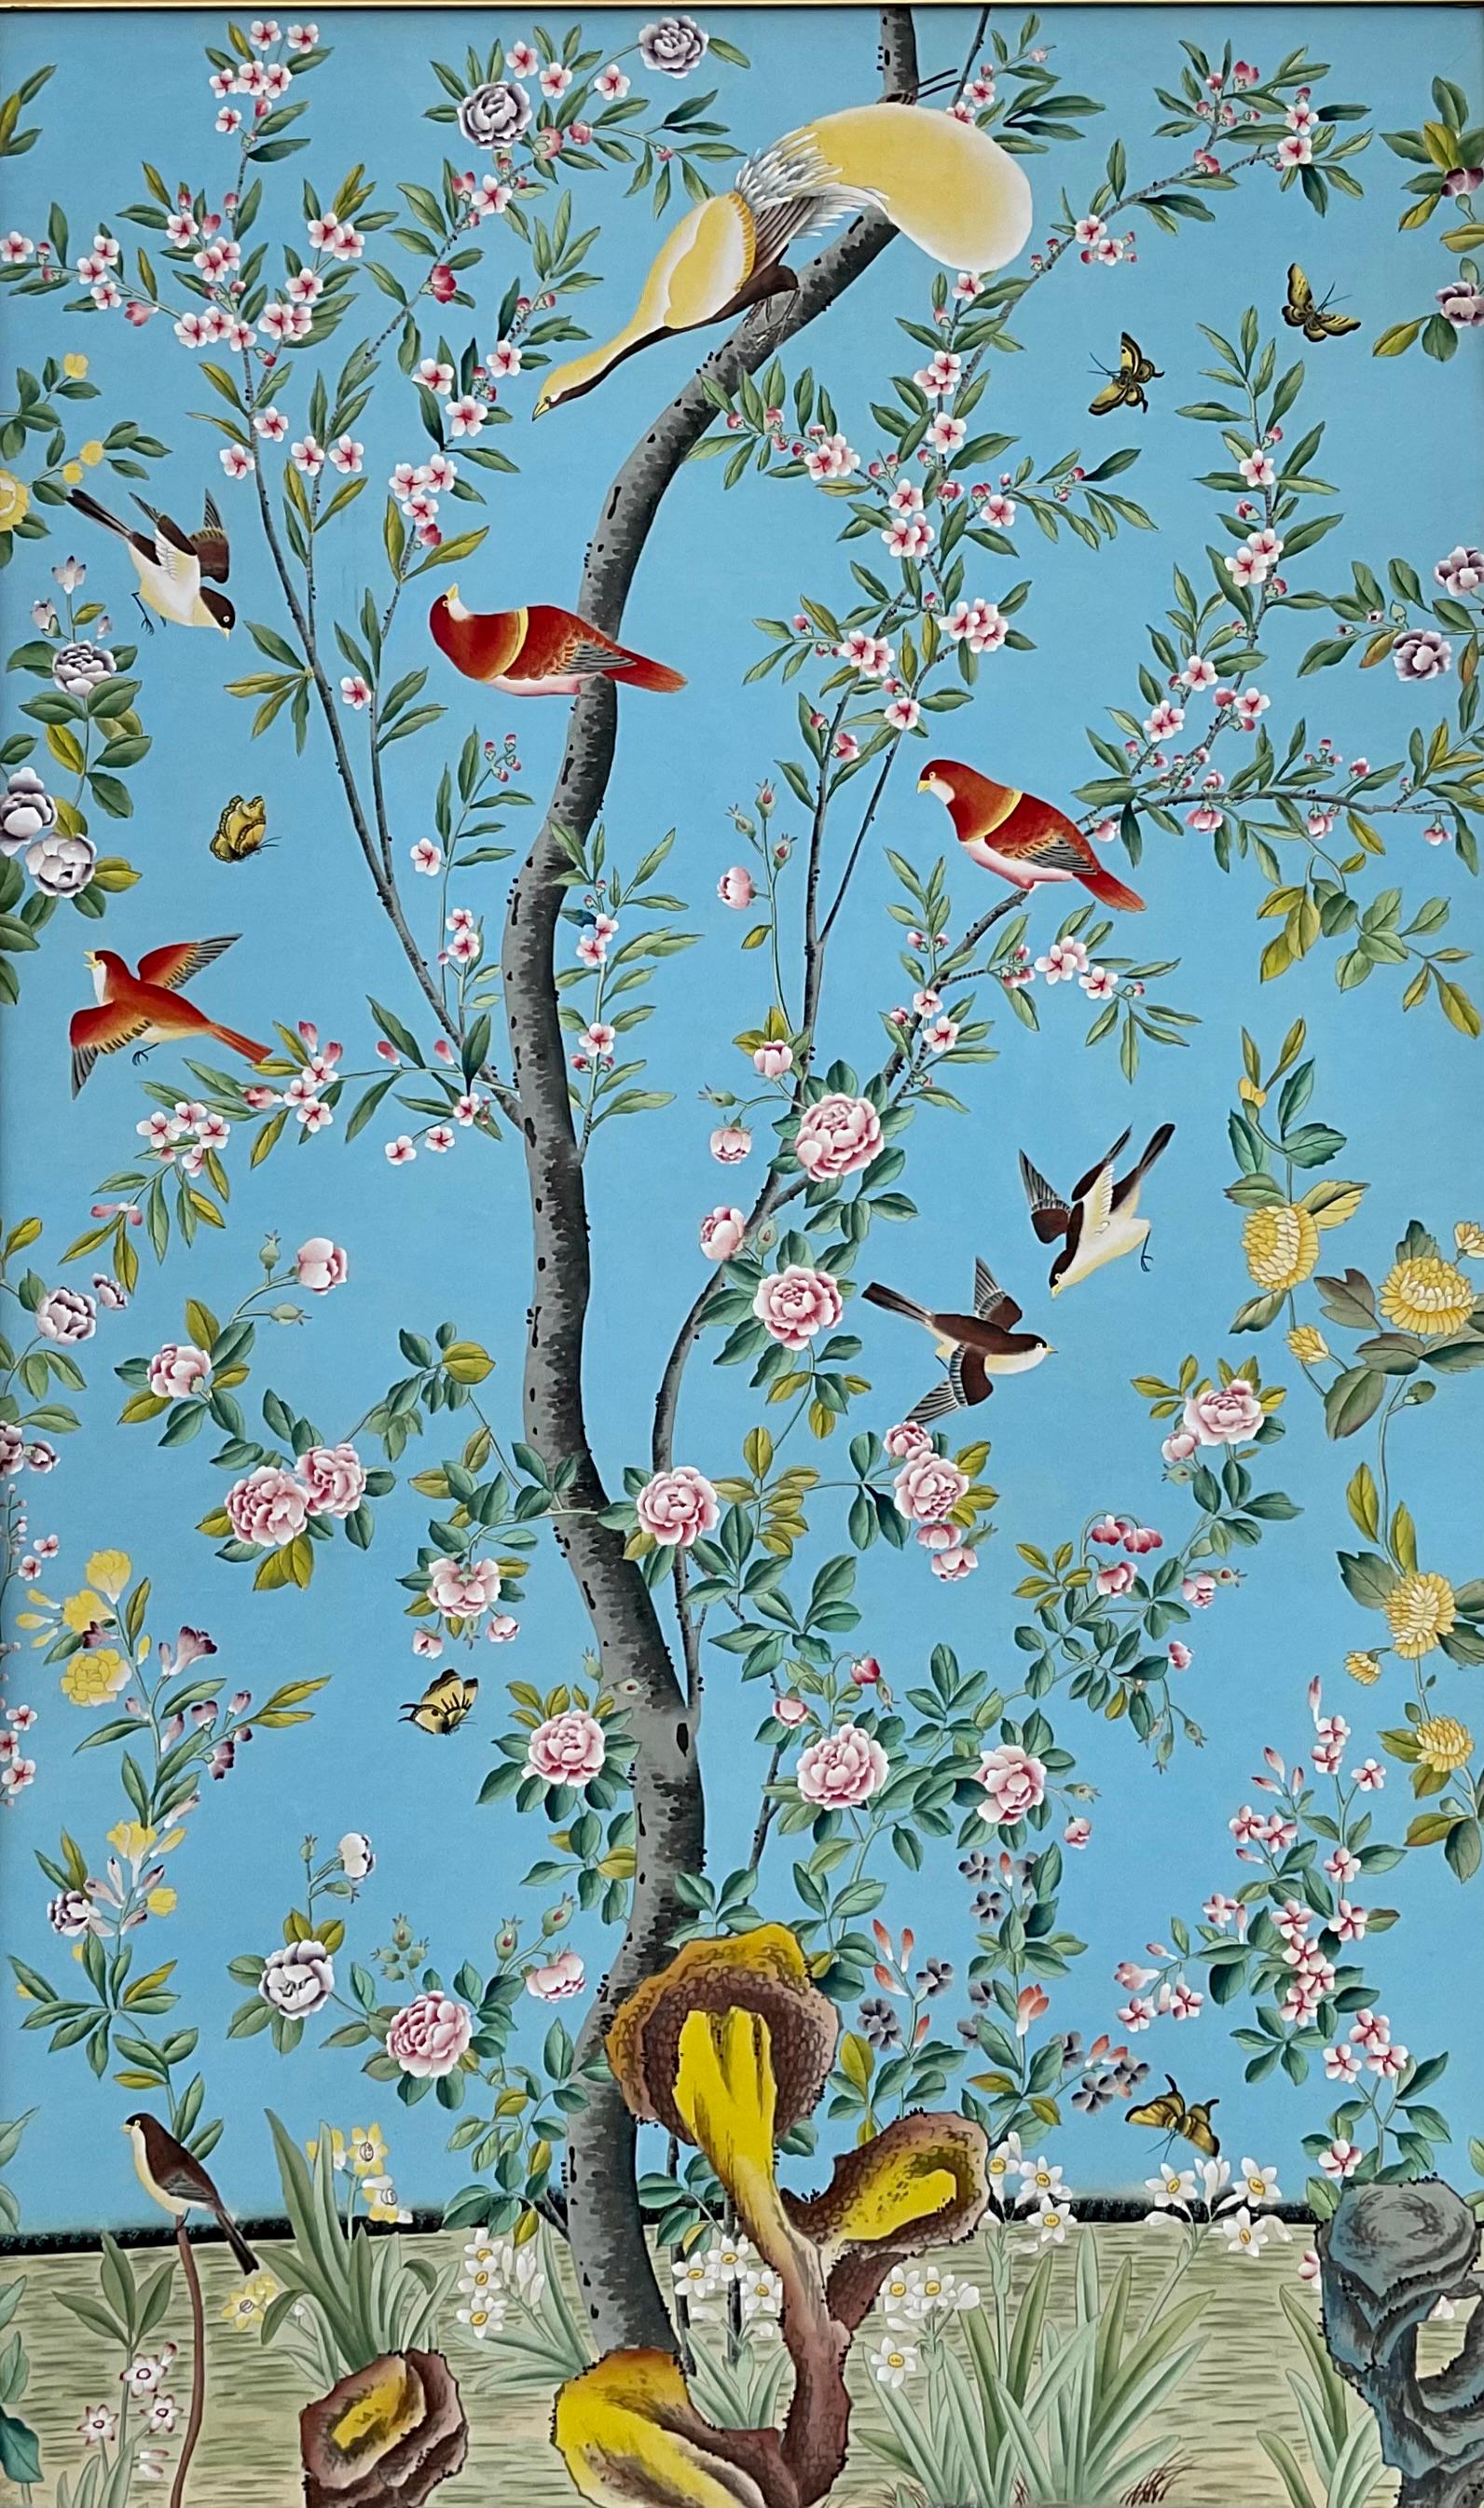 20th century chinoiserie style hand painted watercolor on paper in stunning colors to add elegance to any room.  Painting depicts exotic birds perched on branches of a flowering tree all against a bright azure-like blue background. Painting is